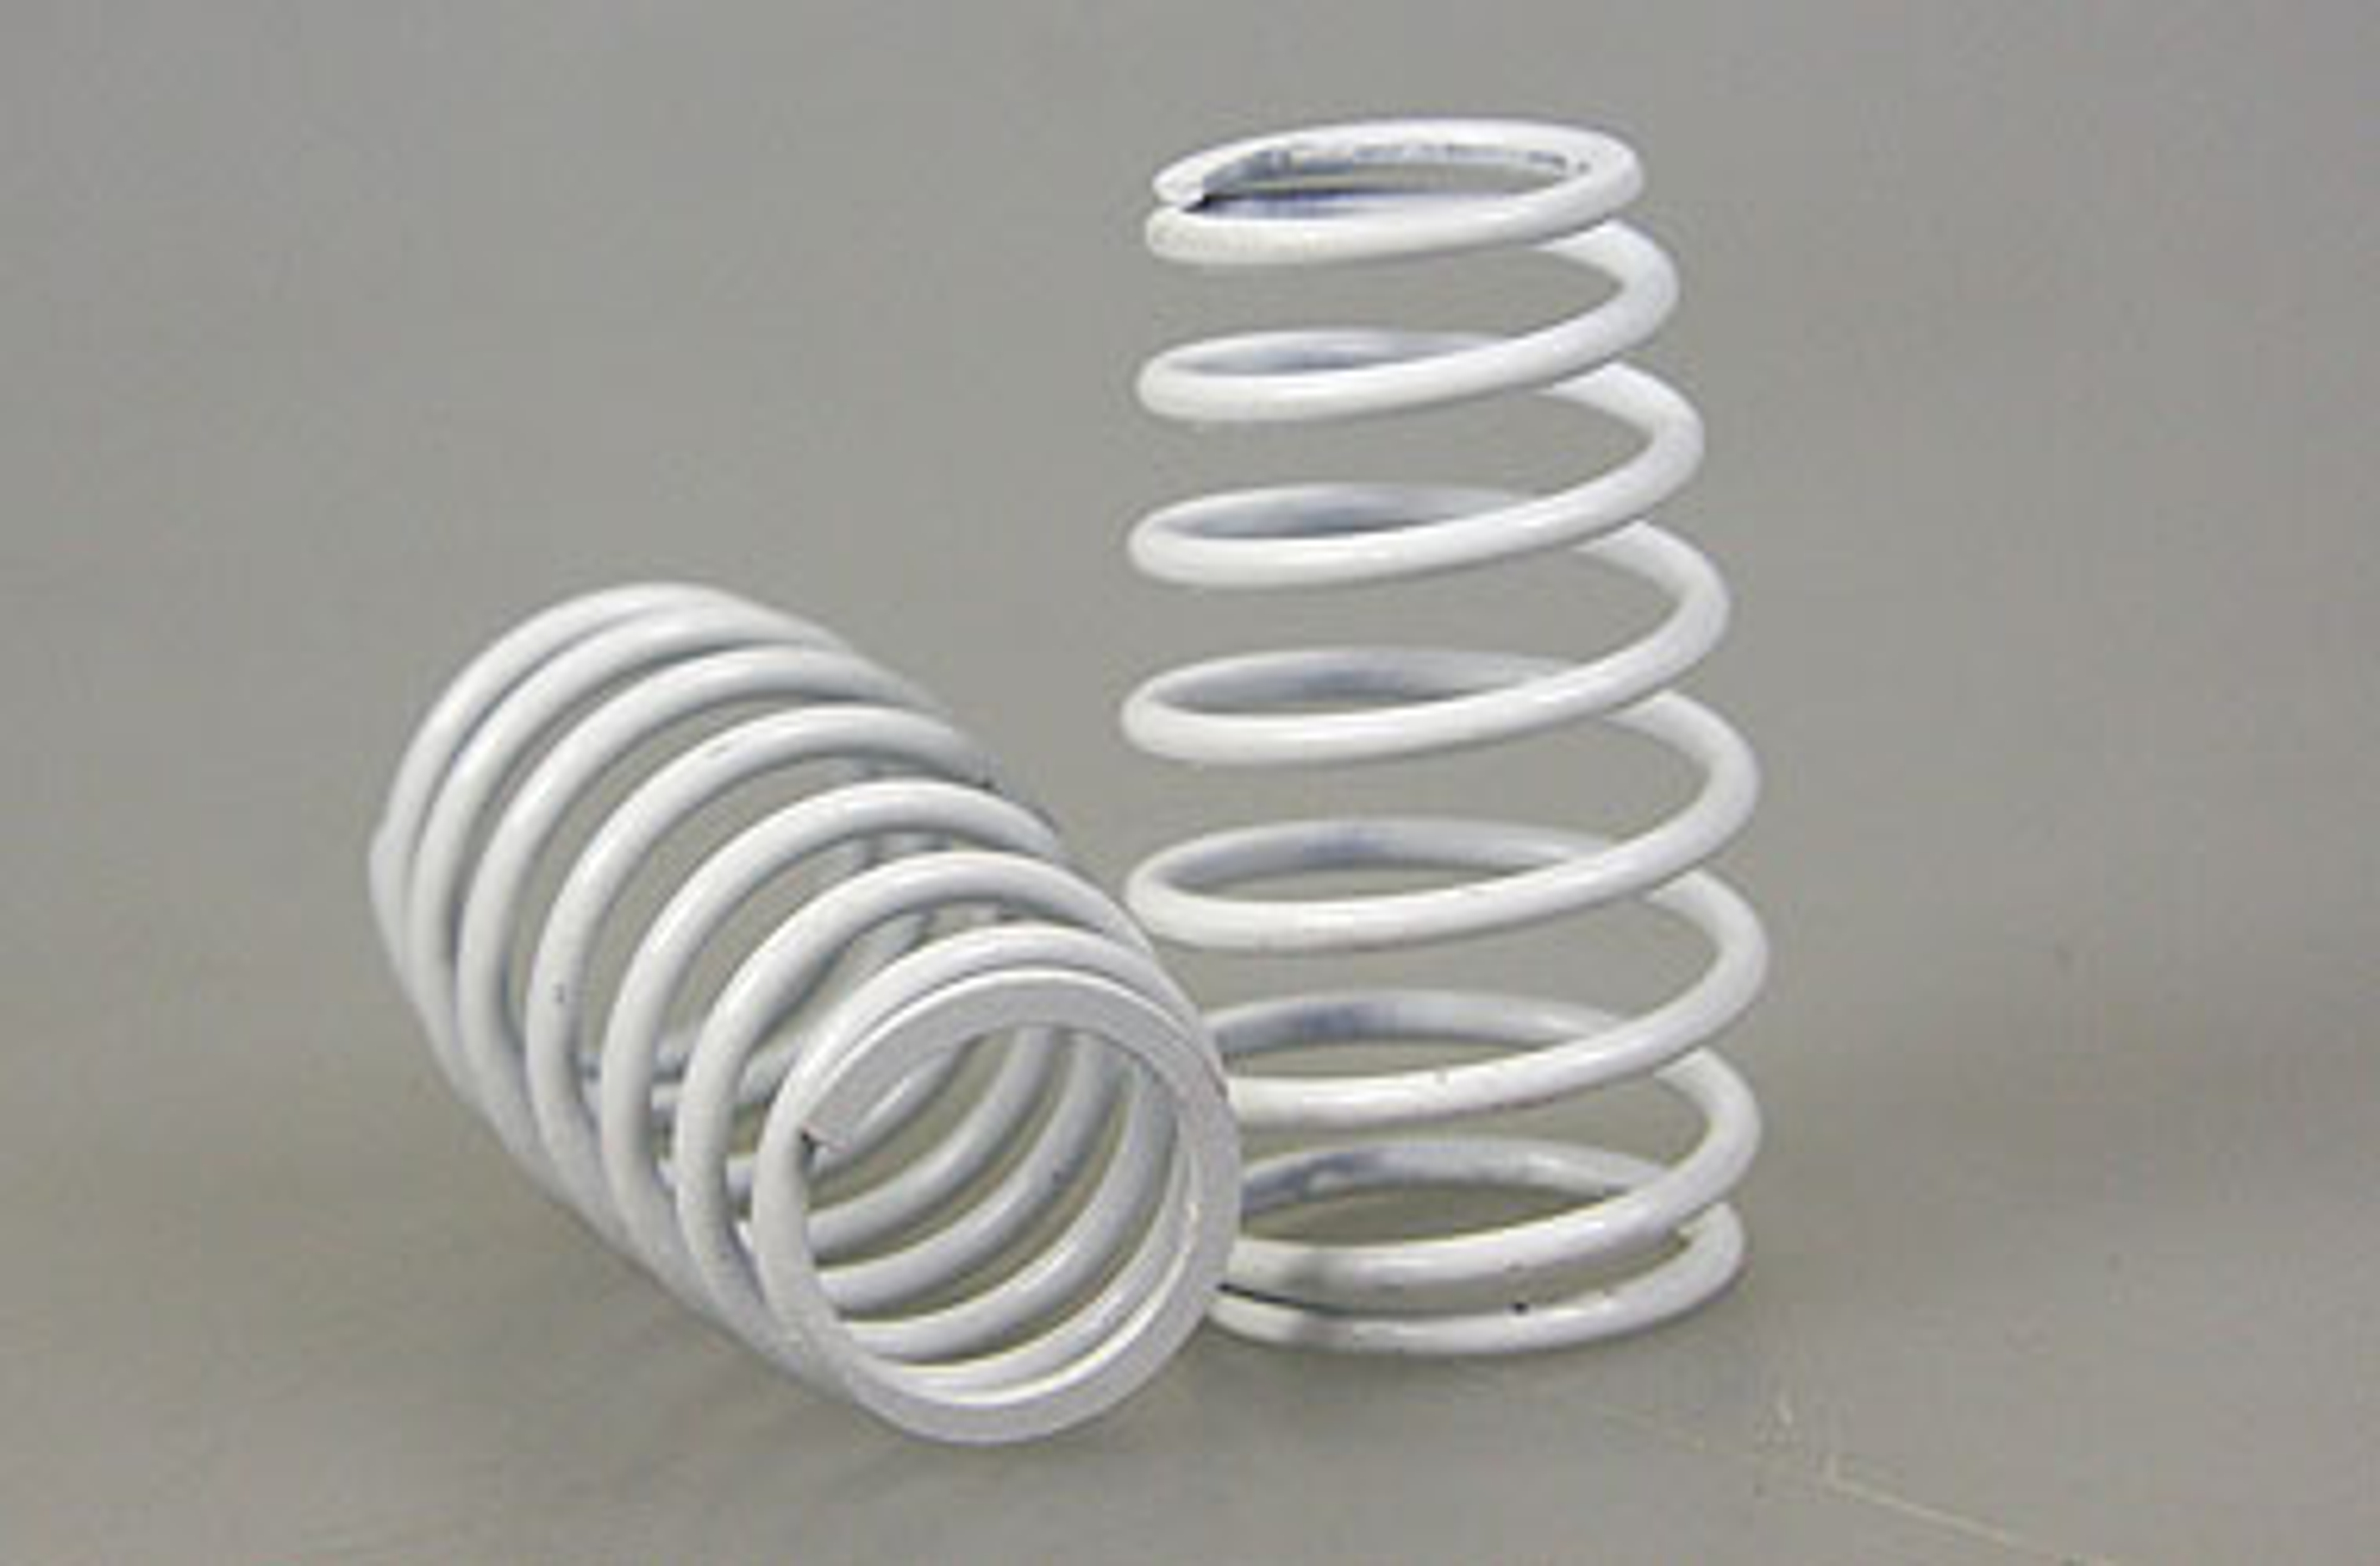 y0452 HT Cask shaped springs for Mecatech Klick-Shocks und Big Bore, white 2,4 mm